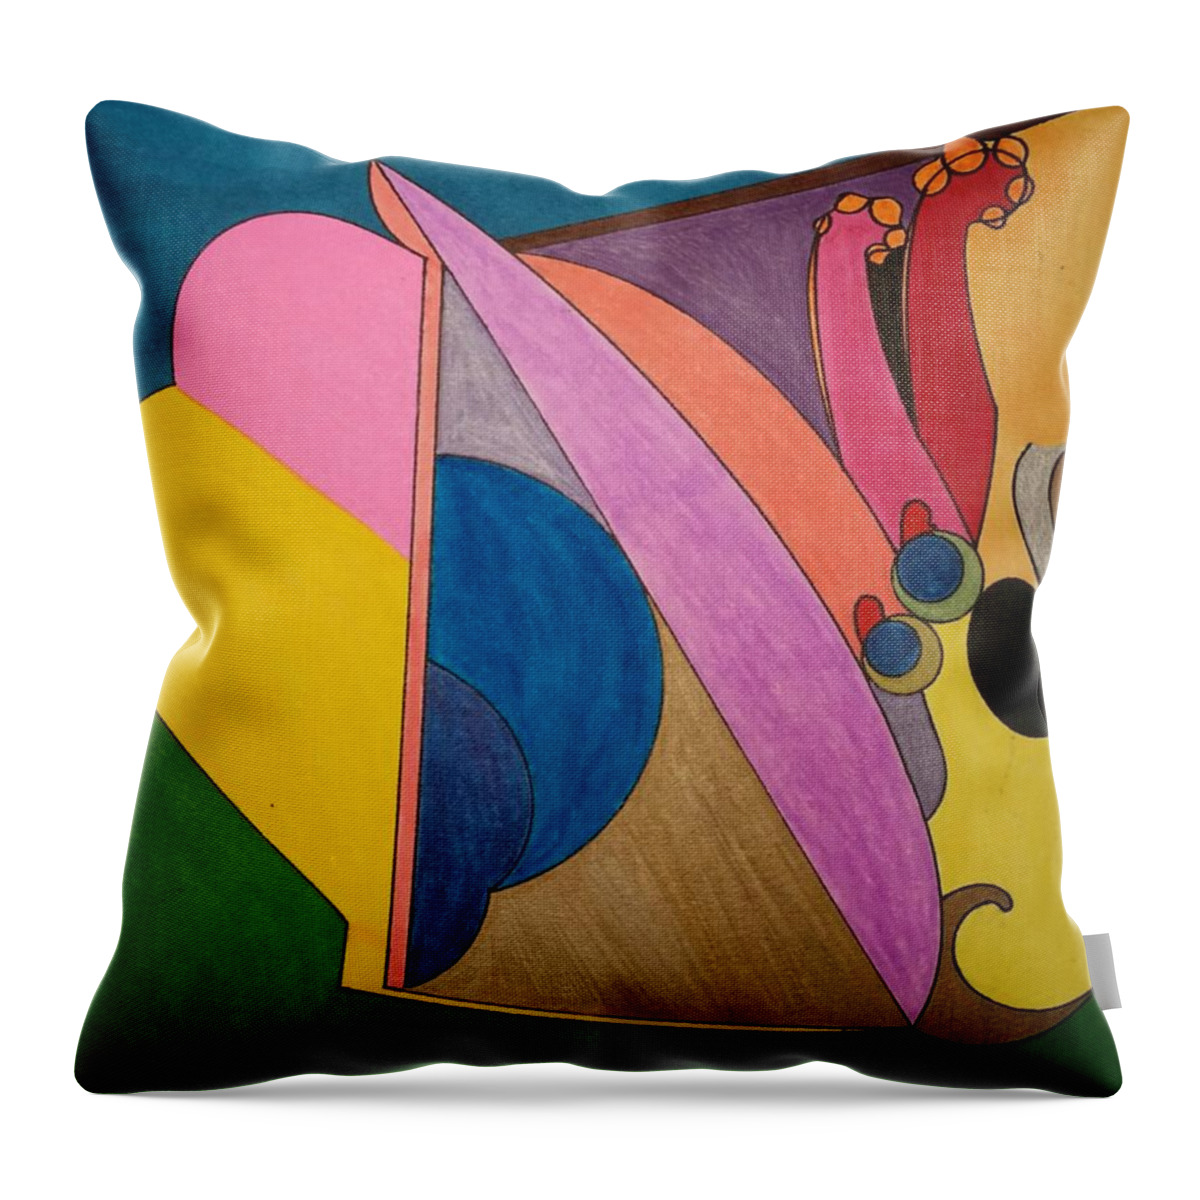 Geo - Organic Art Throw Pillow featuring the painting Dream 328 by S S-ray